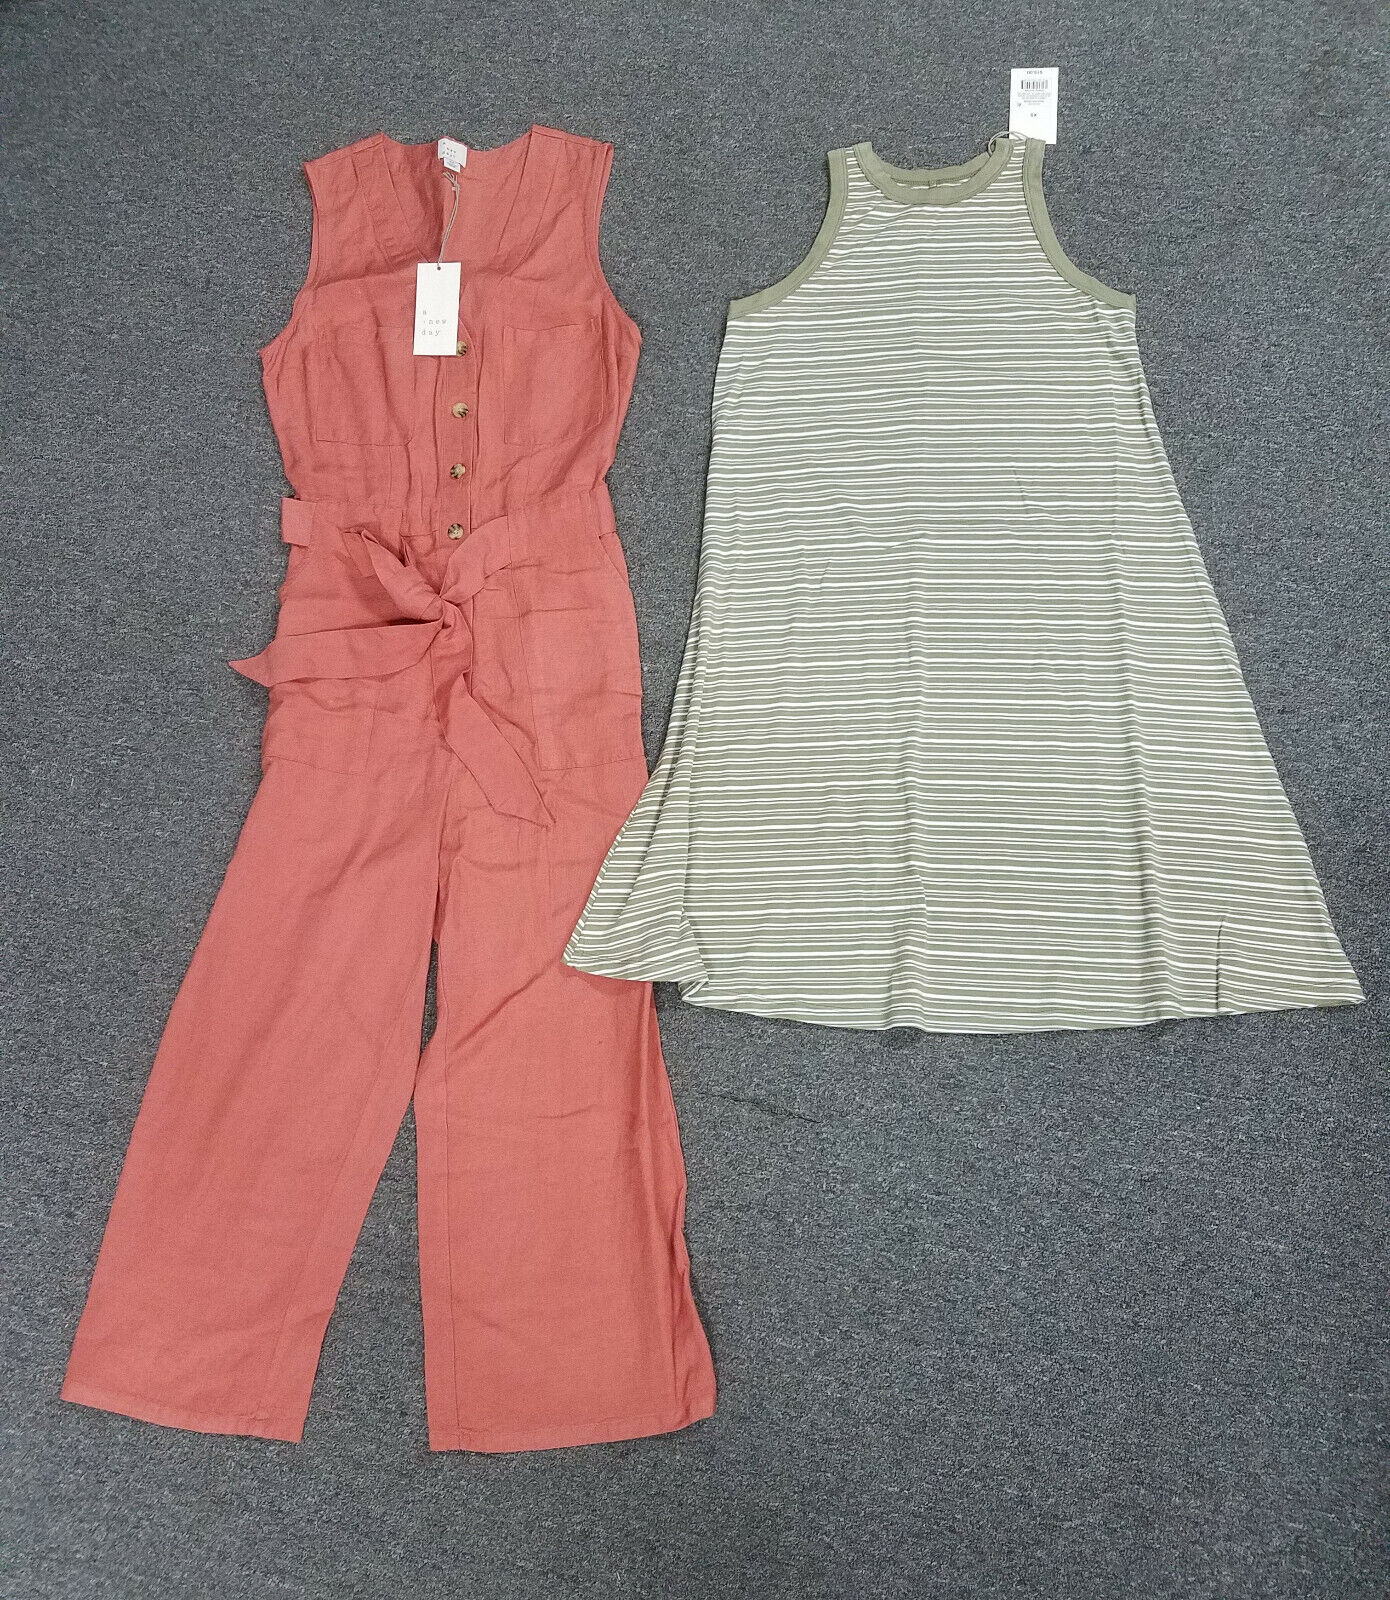 A New Day Bundle Striped Dress and Romper, XS, NWT, SHIPS FREE AND